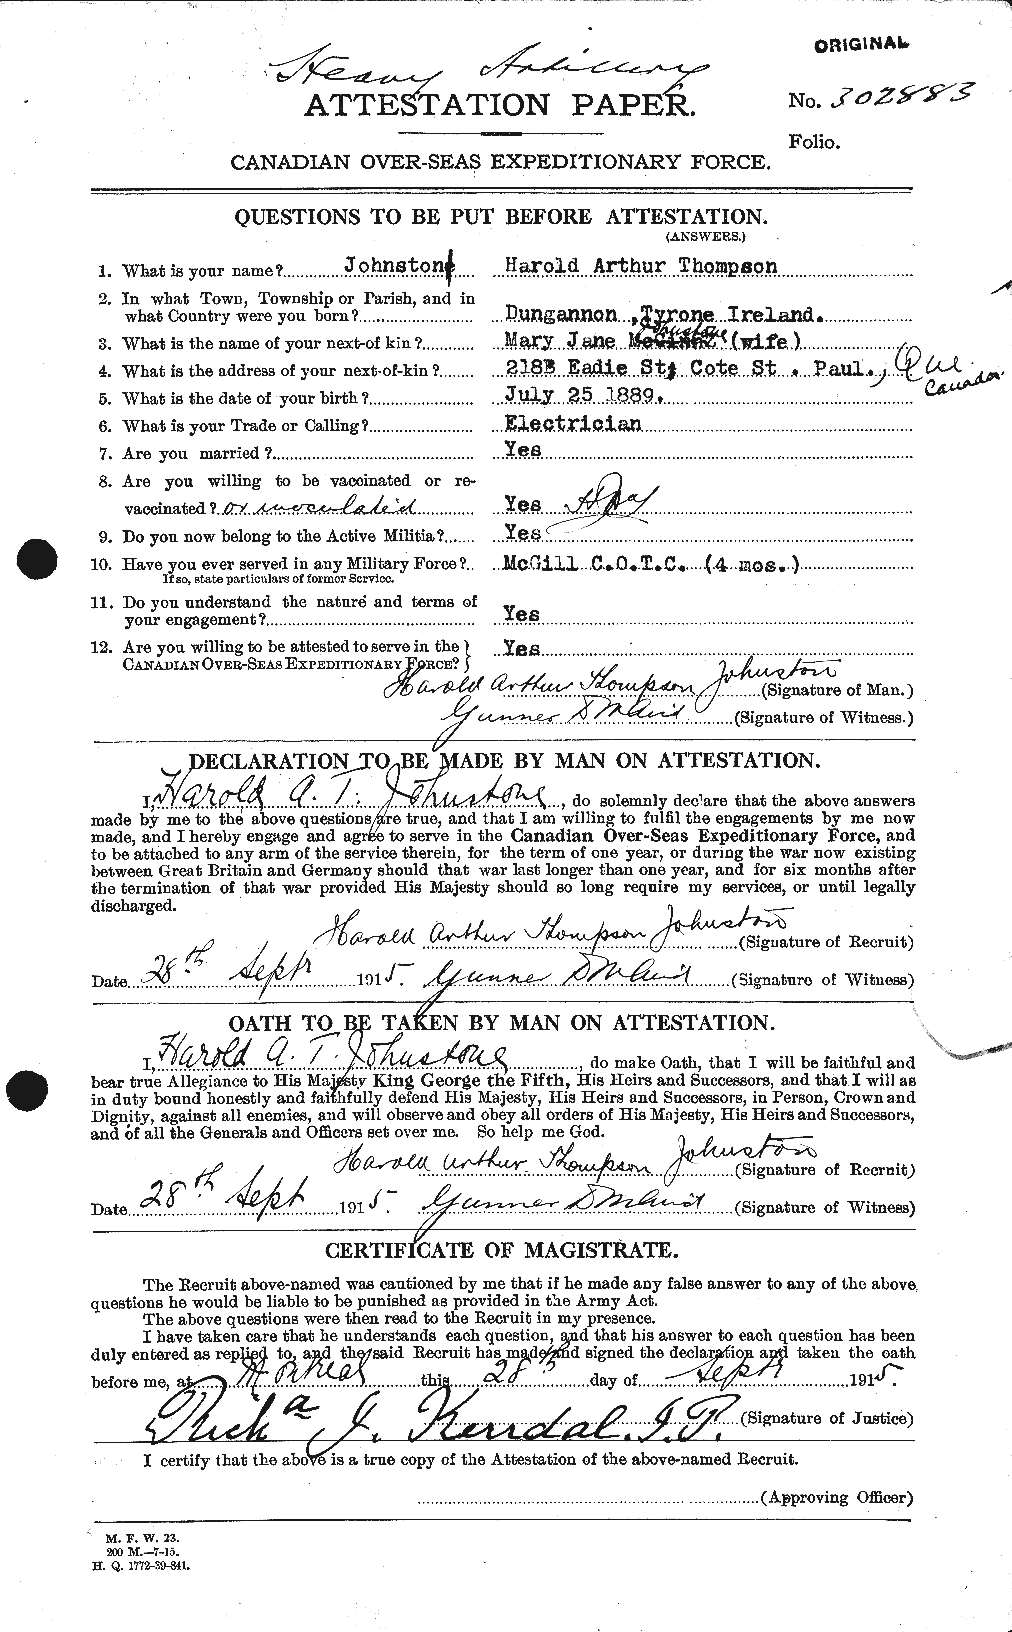 Personnel Records of the First World War - CEF 419485a